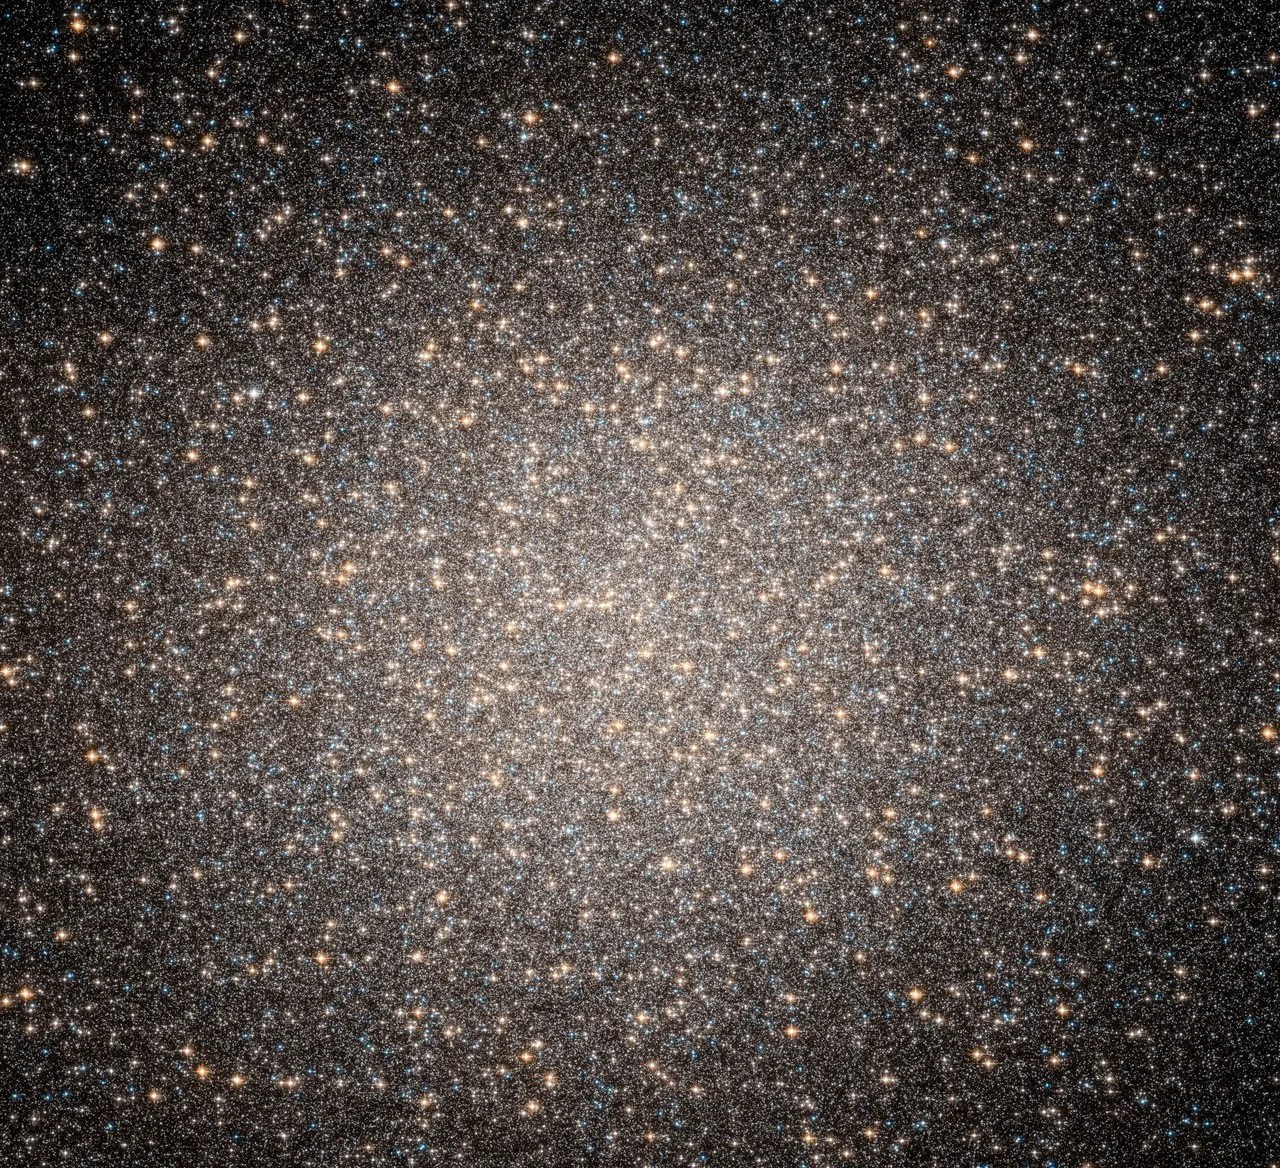 A compact spherical cluster of so many stars that their light blurs together.